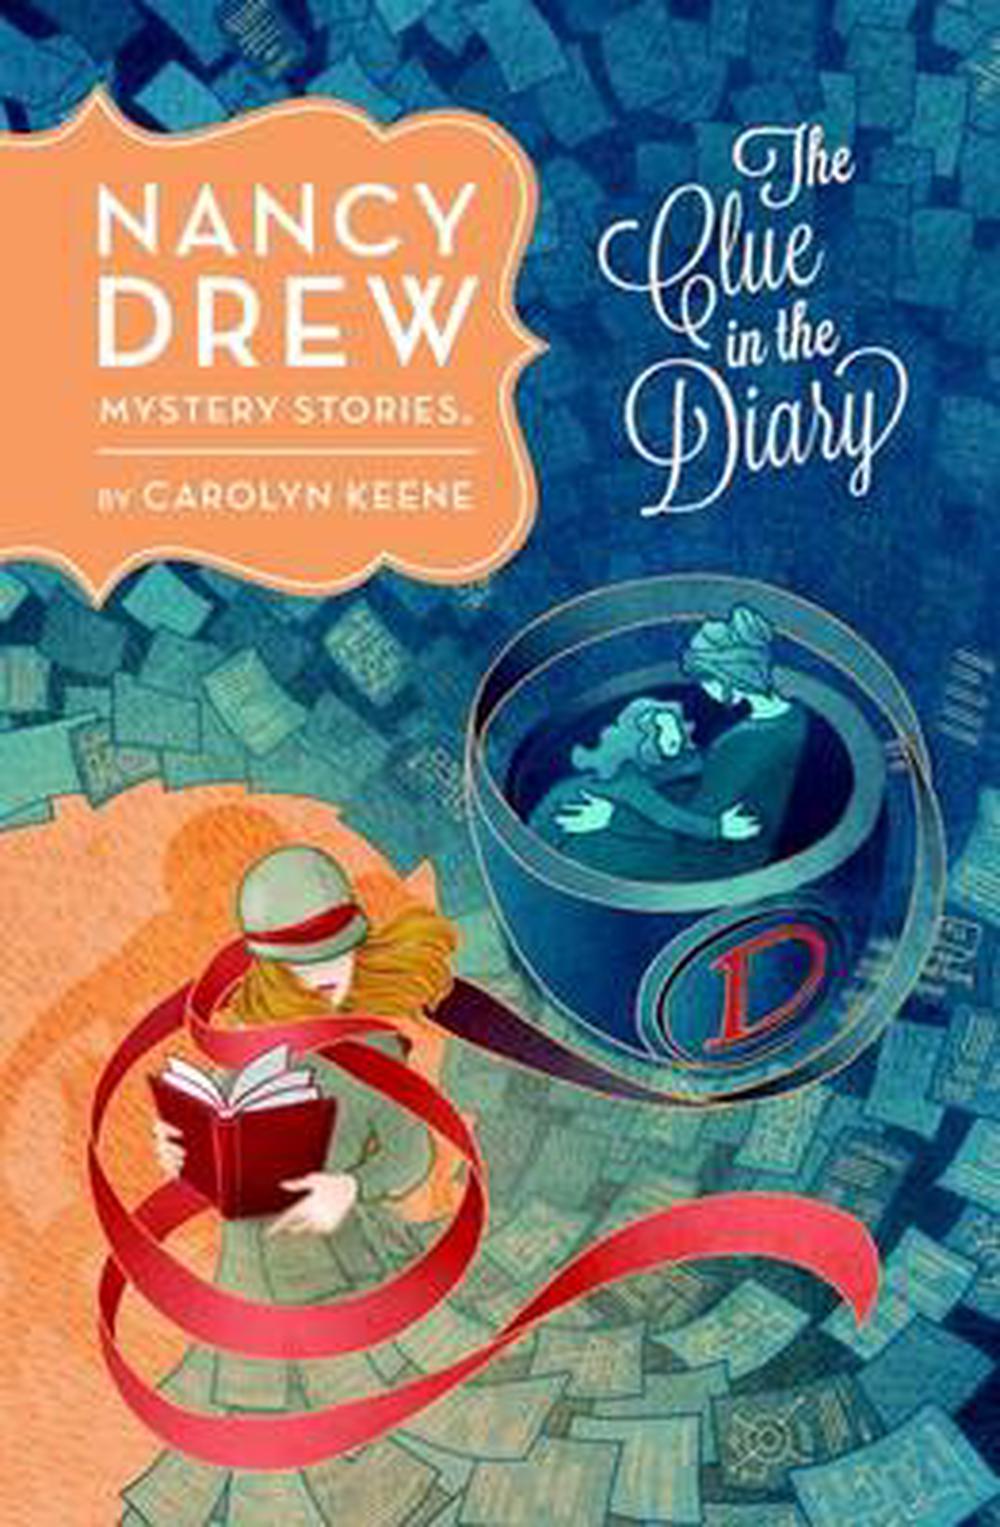 the clue in the diary by carolyn keene